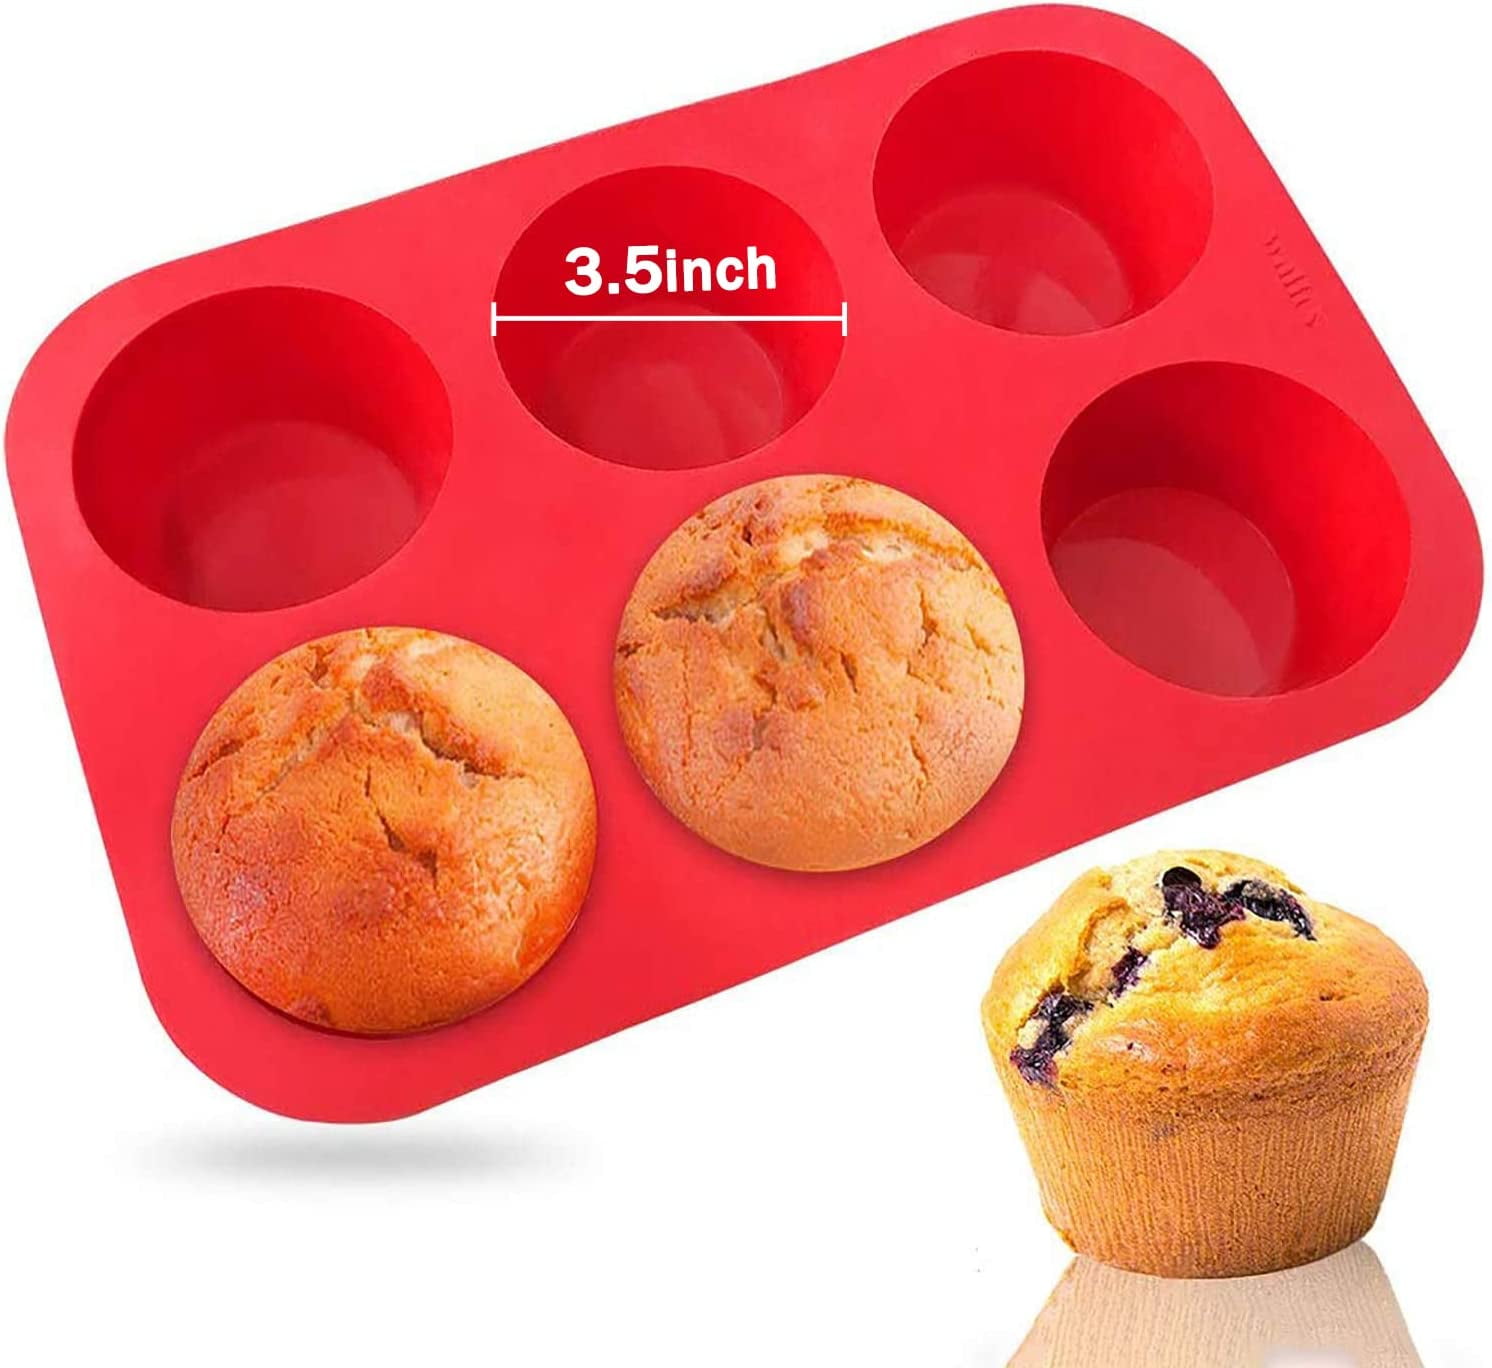 Walfos 6 Cup Jumbo Silicone Texas Muffin Pan + 4 Pieces Non-Stick Silicone  Bread Loaf Pan Super Value Set.